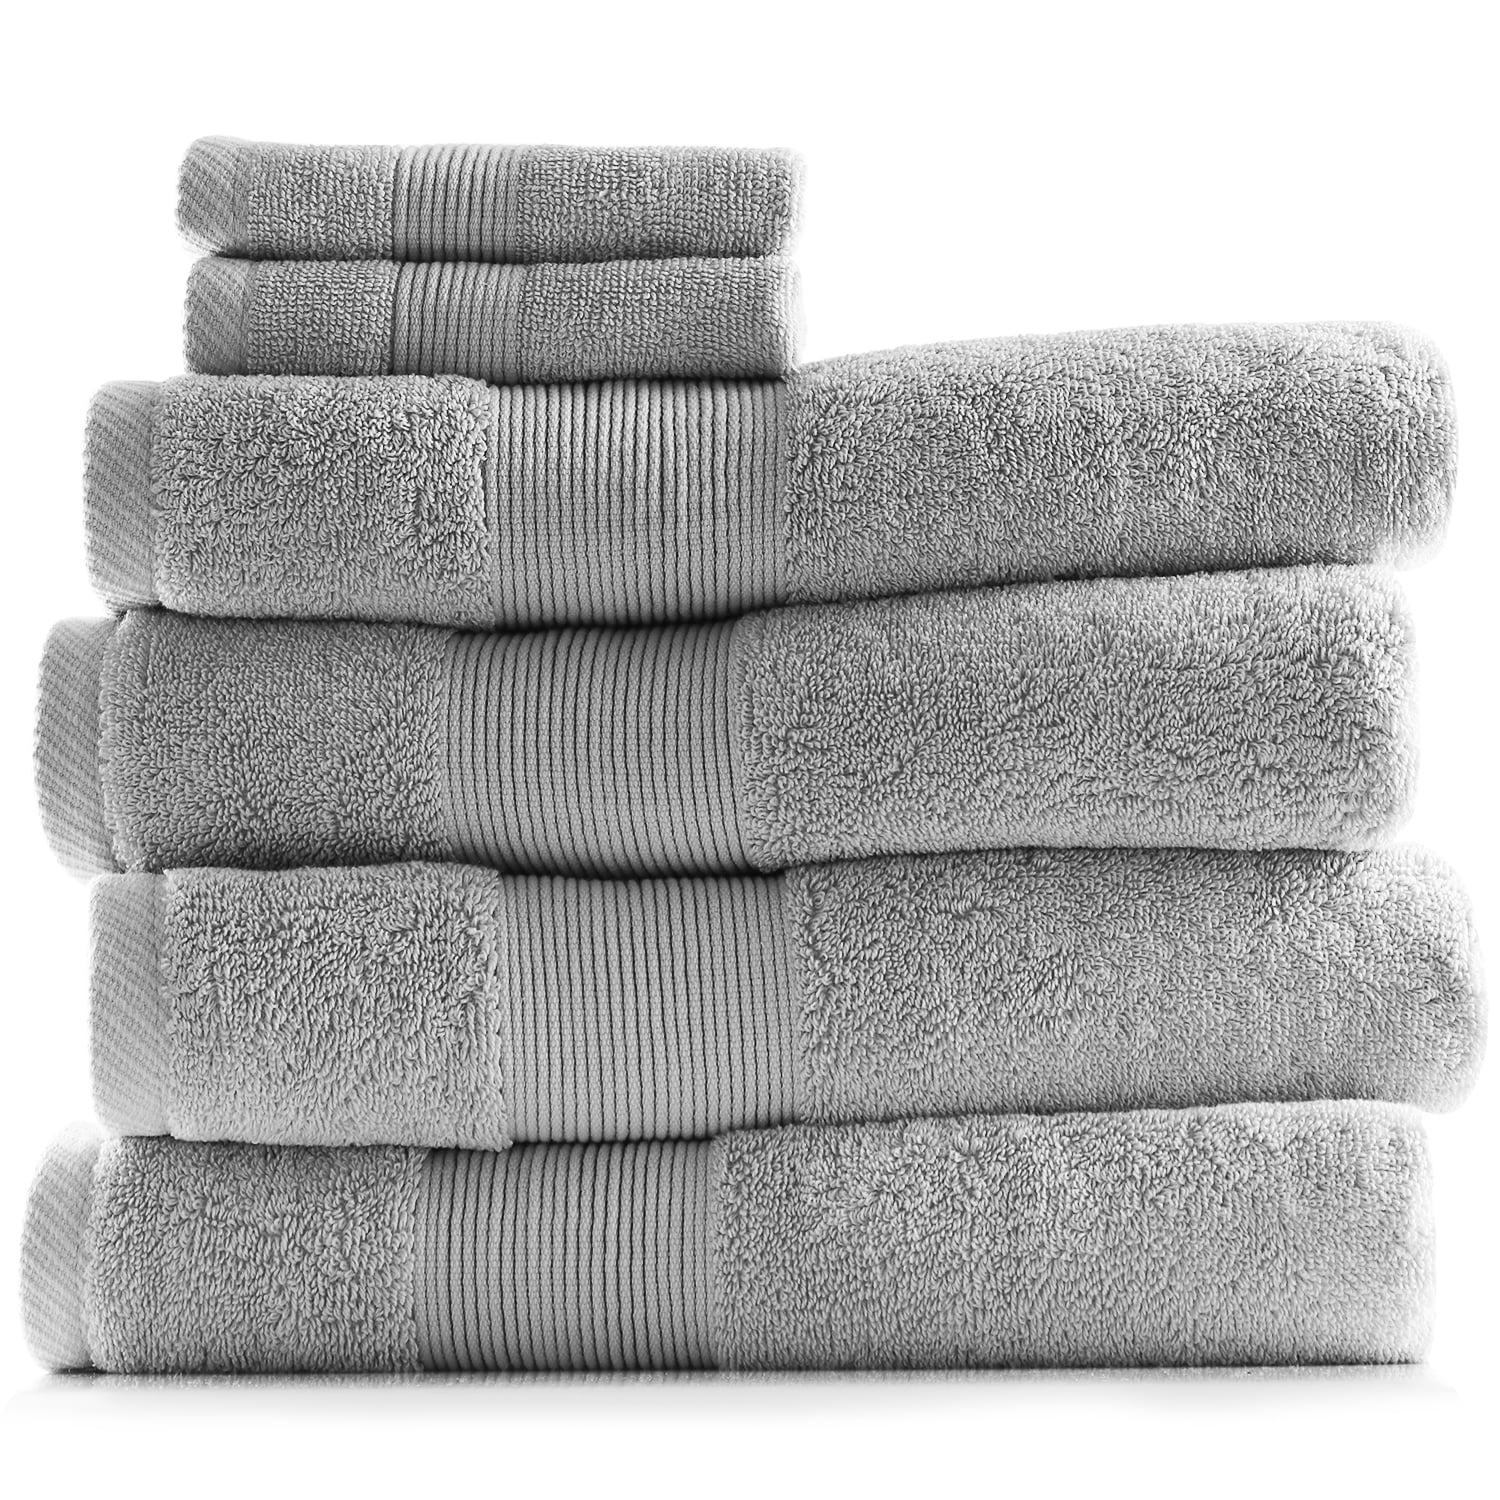 100% Cotton Ultra Bath Collection; Soft and Absorbent Bath Towel Set Navy 